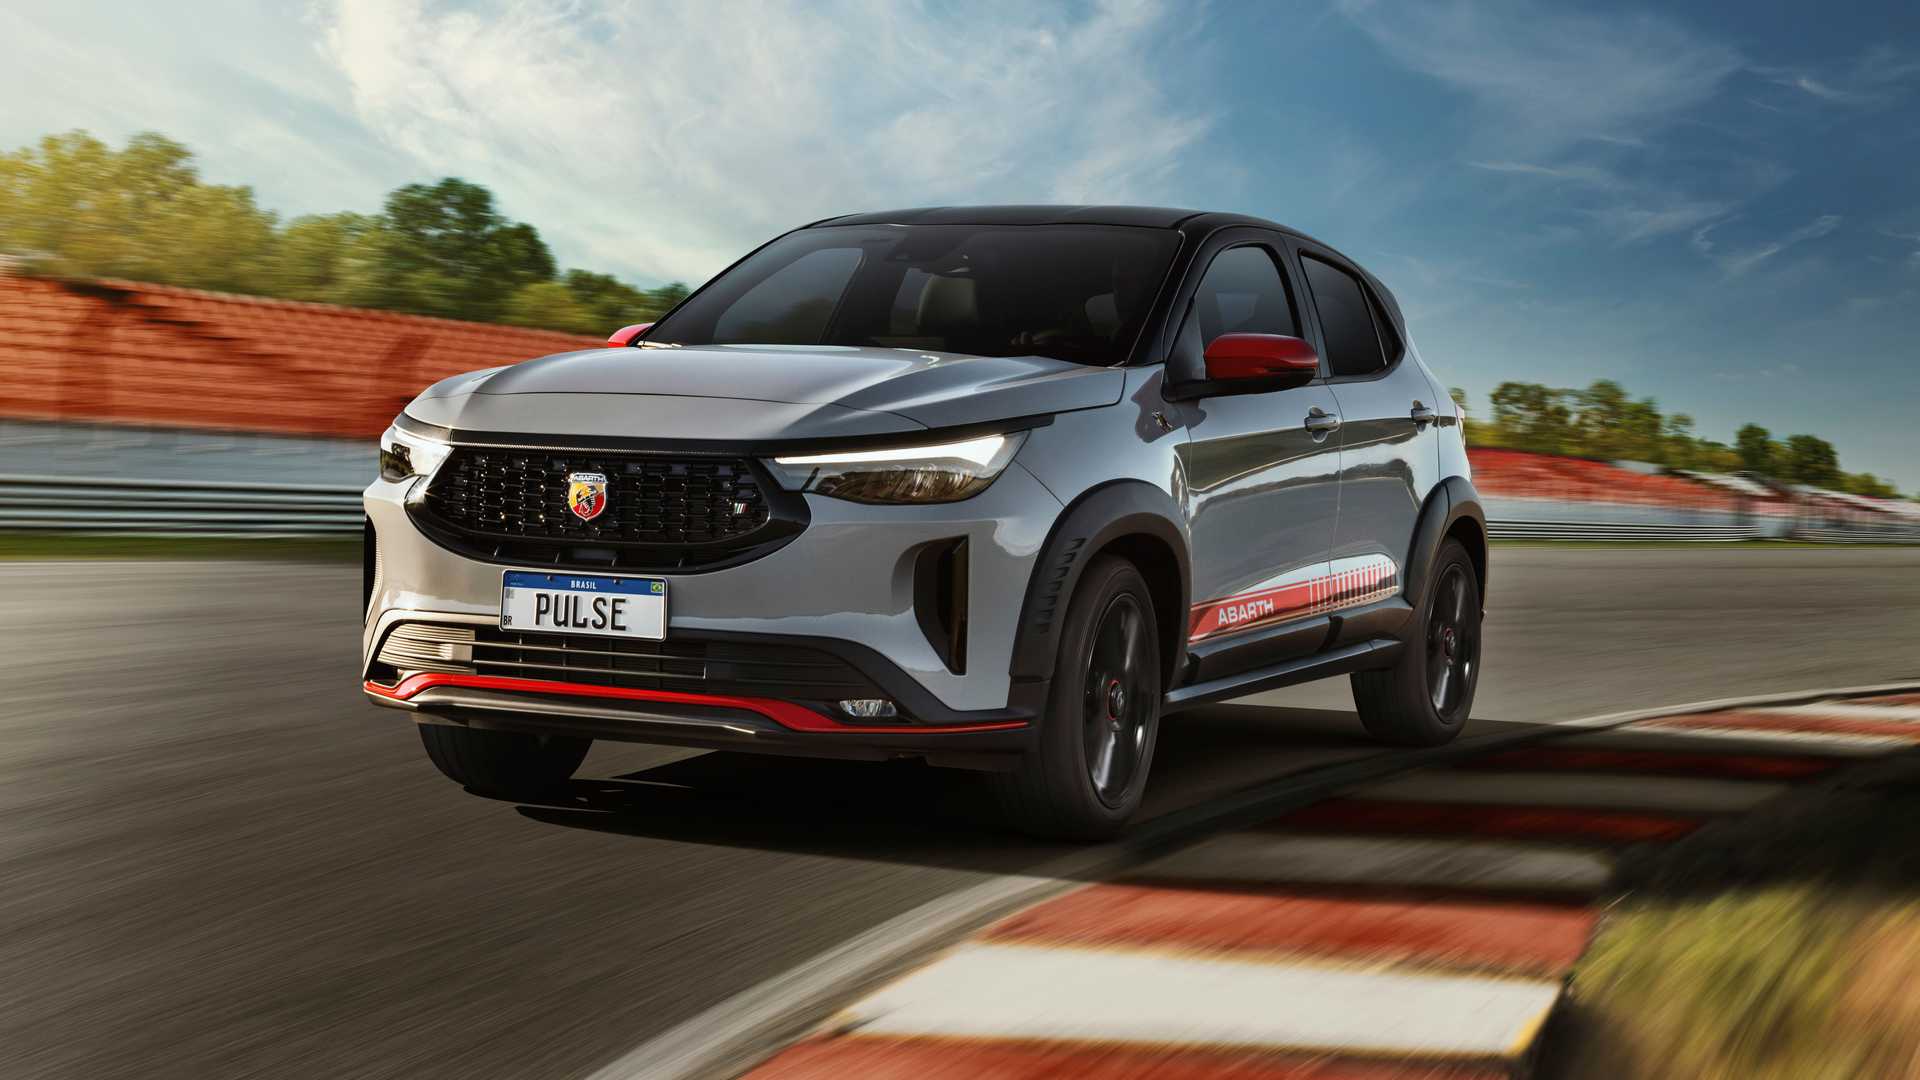 Fiat Pulse SUV gets an Abarth performance version